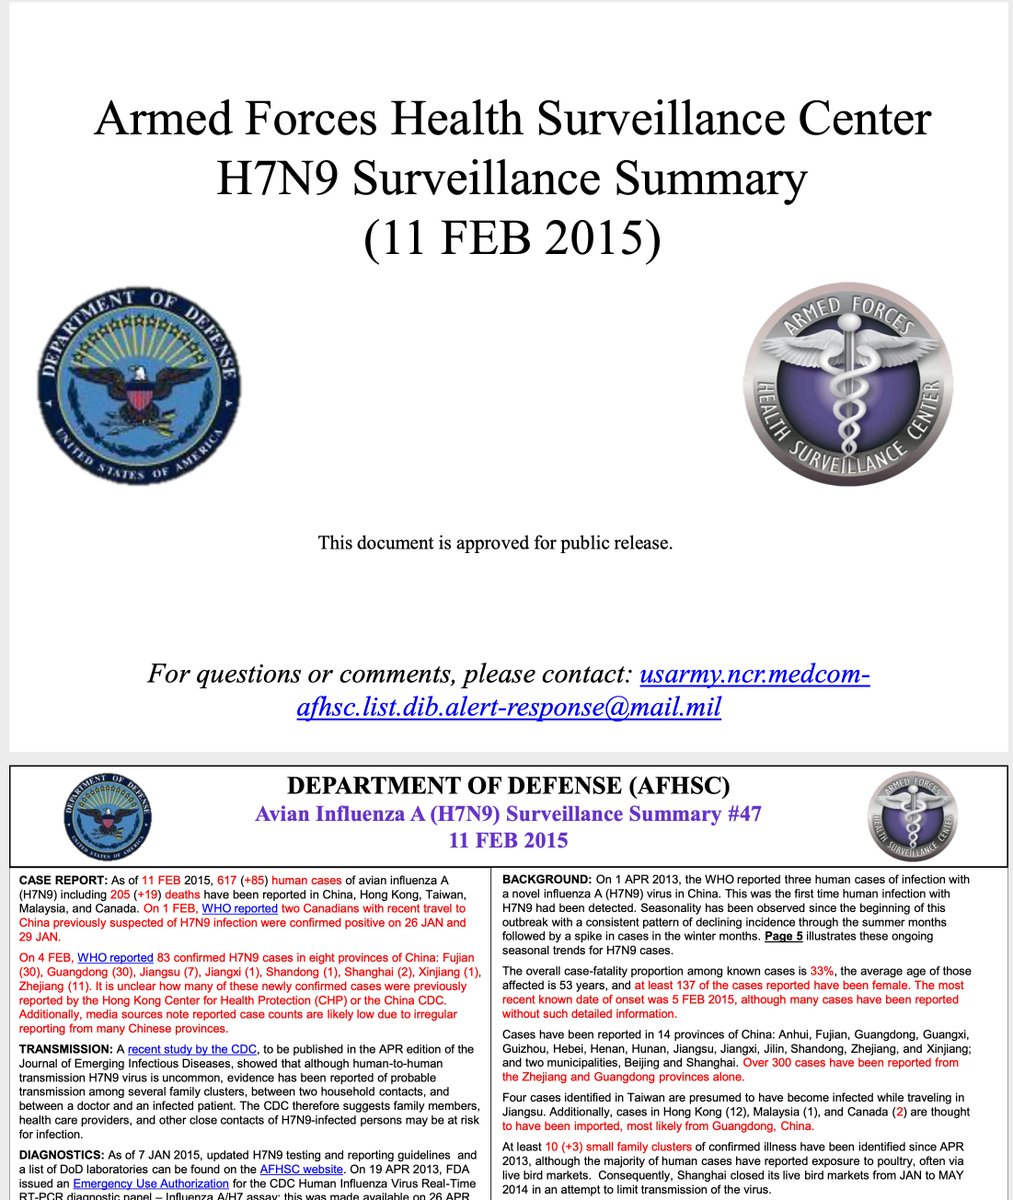 How many other Bird Flu outbreaks has the Pentagon monitored over the last 10 years? 2 others? 5 others? What other viruses, and where were the outbreaks? What weapons was the Army going to use to protect us? Or, was this more of an Air Force mission, because it's chickens?